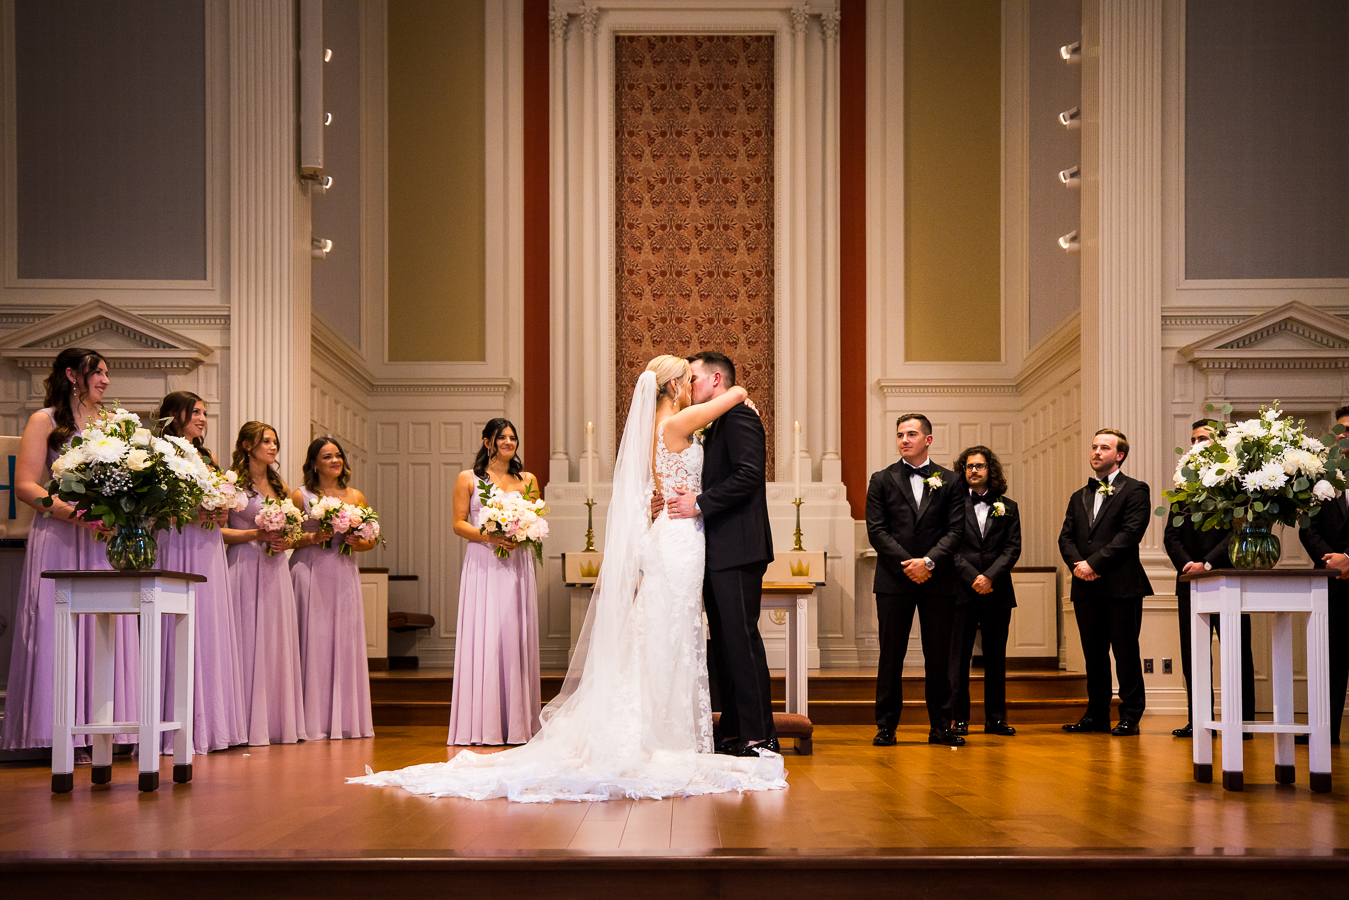 st pauls lutheran church wedding photographer, lisa rhinehart, captures the couples first kiss during their wedding ceremony